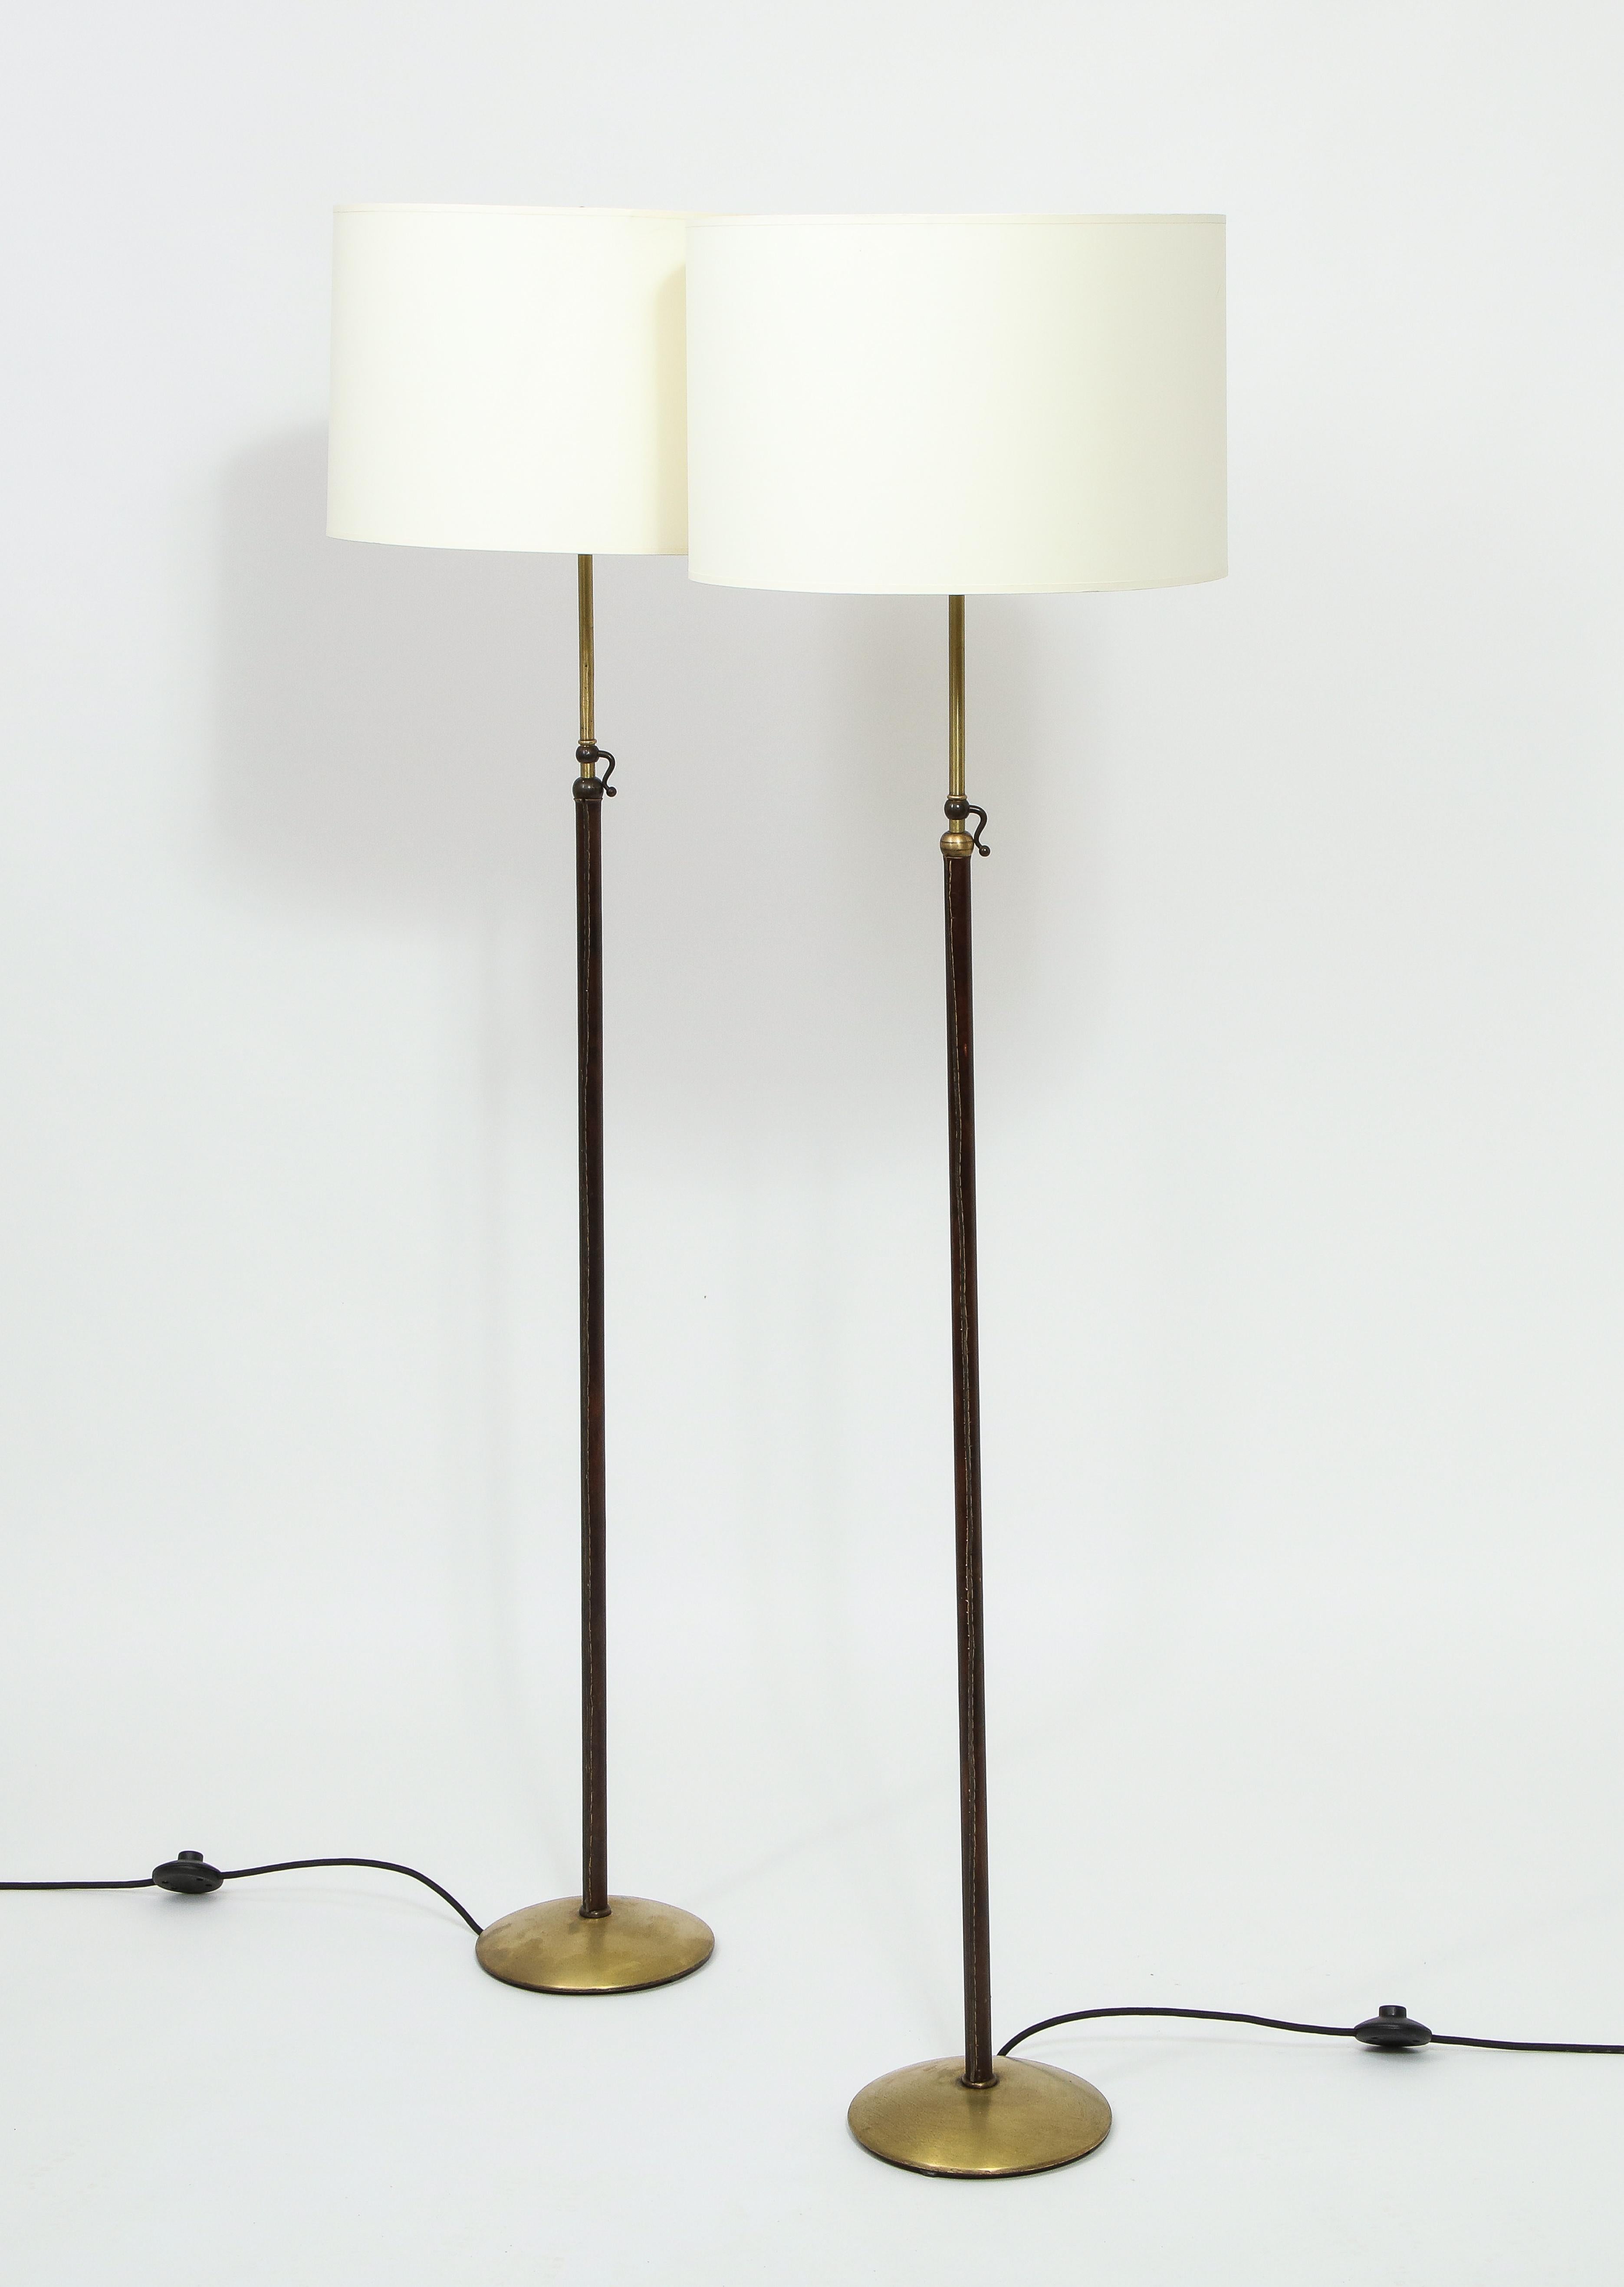 Adjustable pair of standing lamps by Jacques Adnet, Leather over brass.
*Lampshades aren't included but available on request